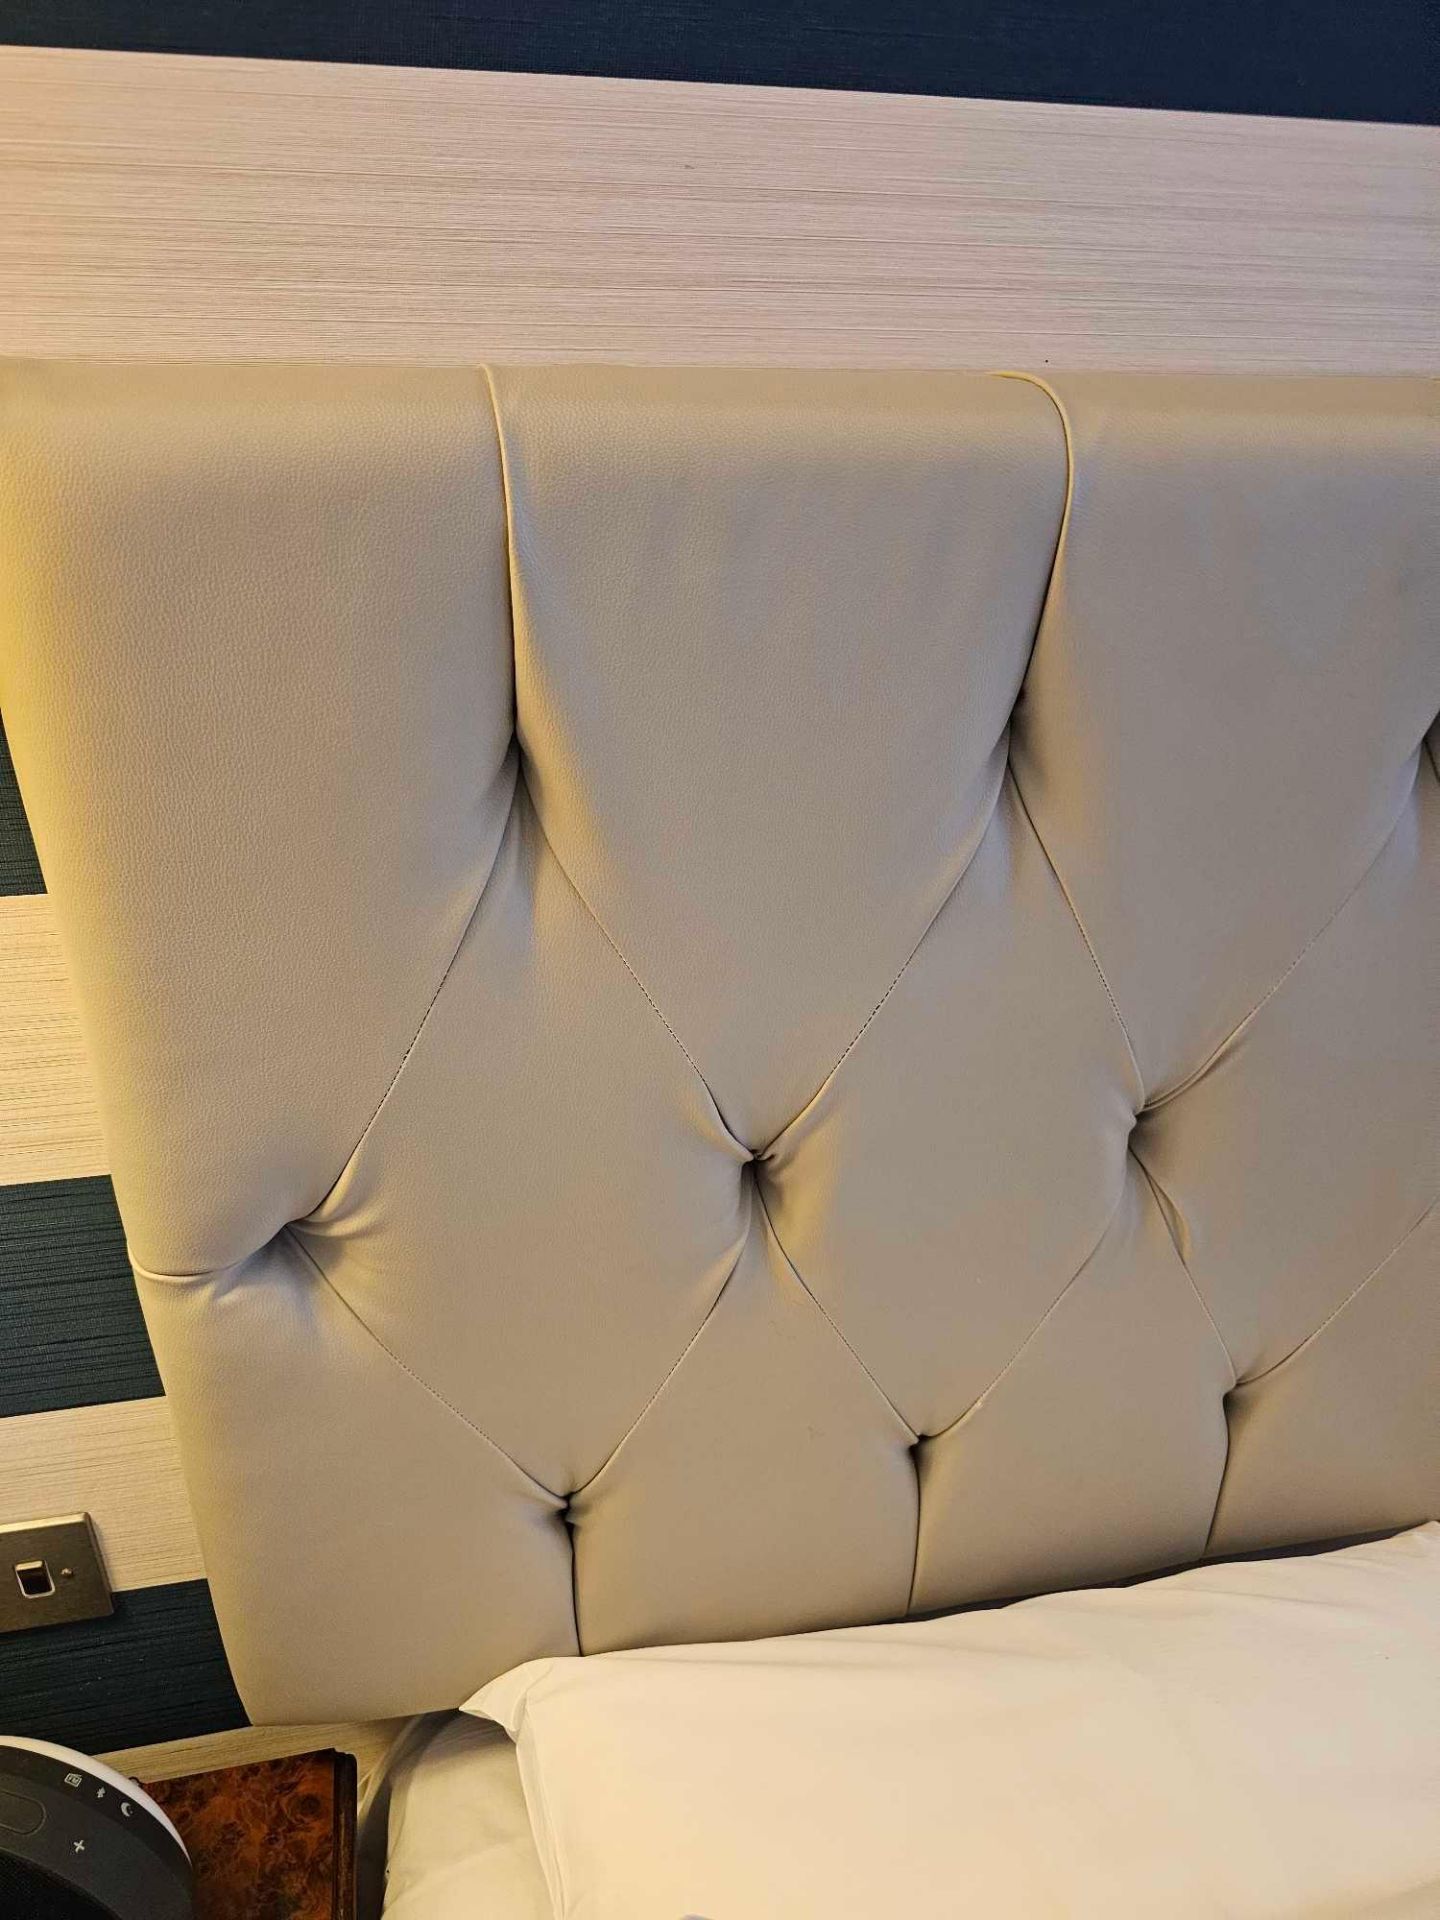 Tufted Headboard The Upholstered Off Grey Tufted Padded Headboard Is An Elegant And Sophisticated - Image 2 of 2